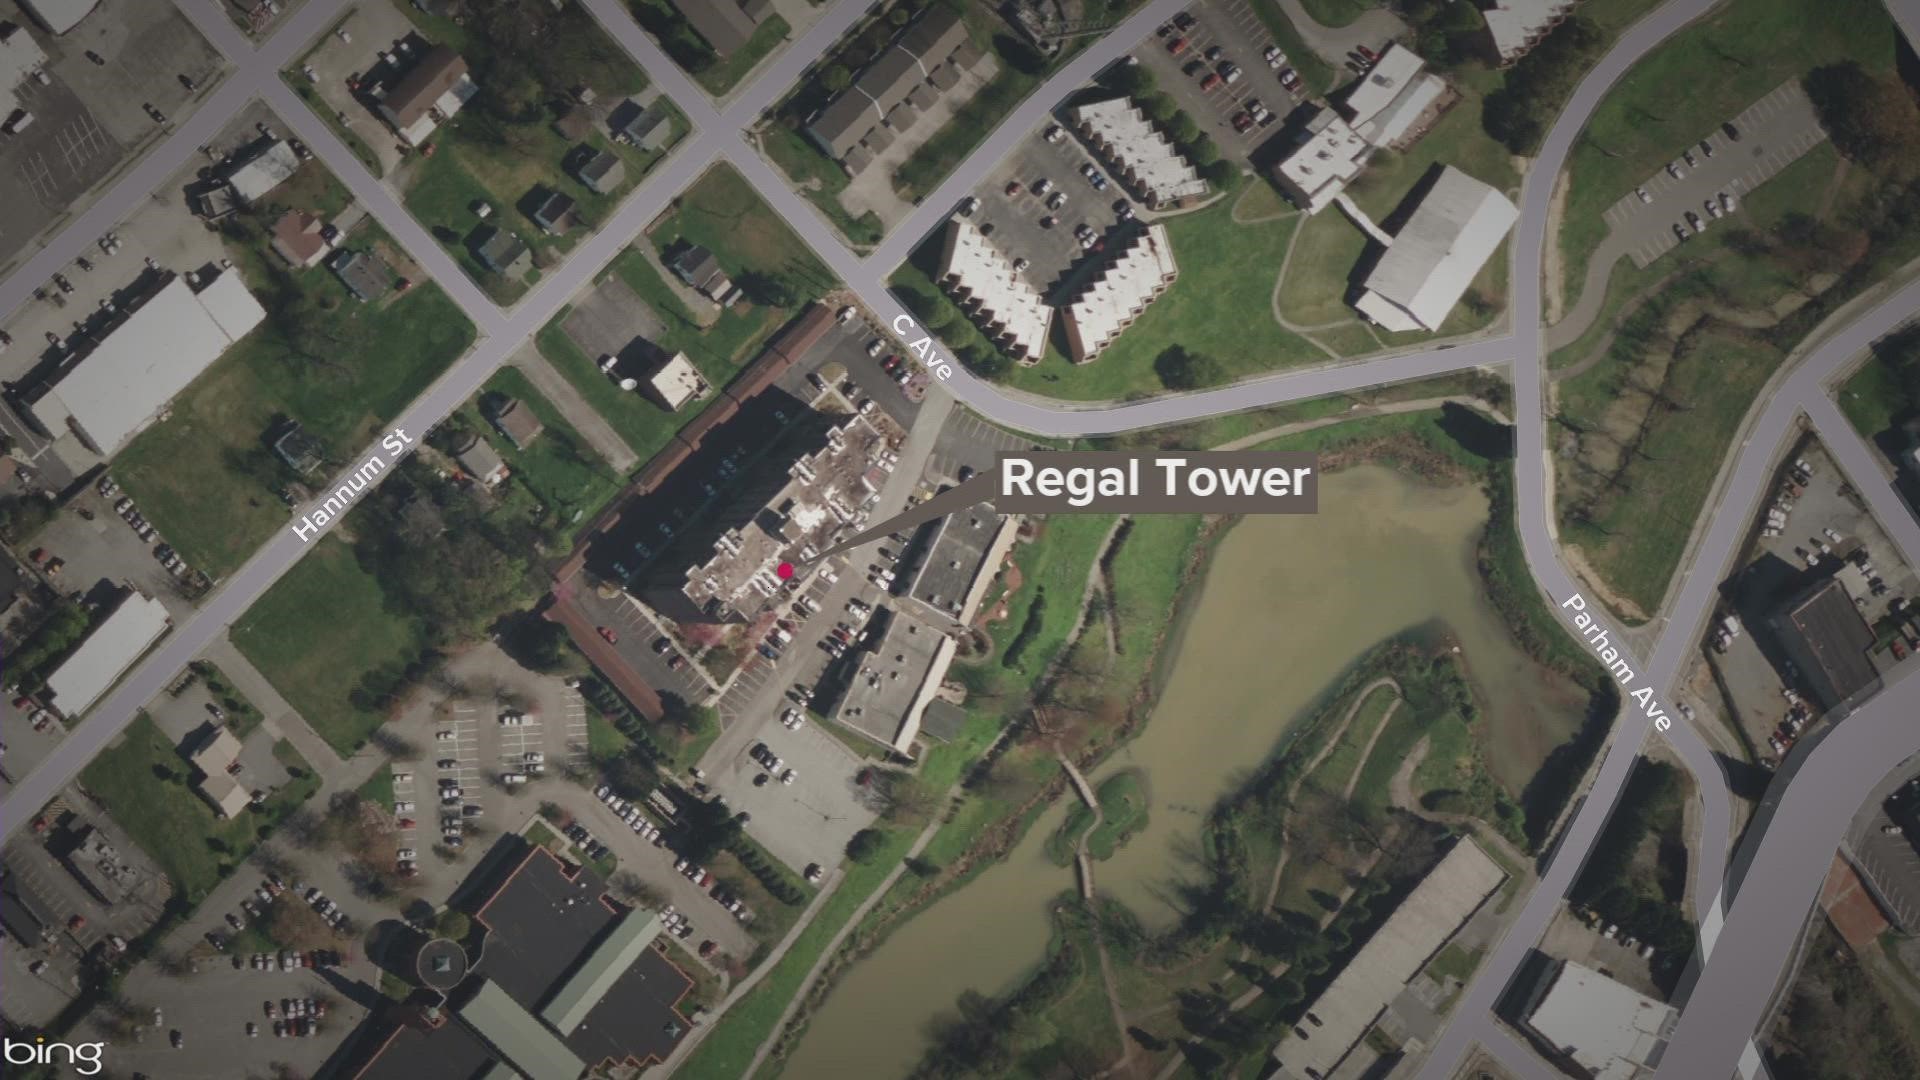 Crews initially responded to a fire at Regal Tower and later found two people dead, saying both had been shot.